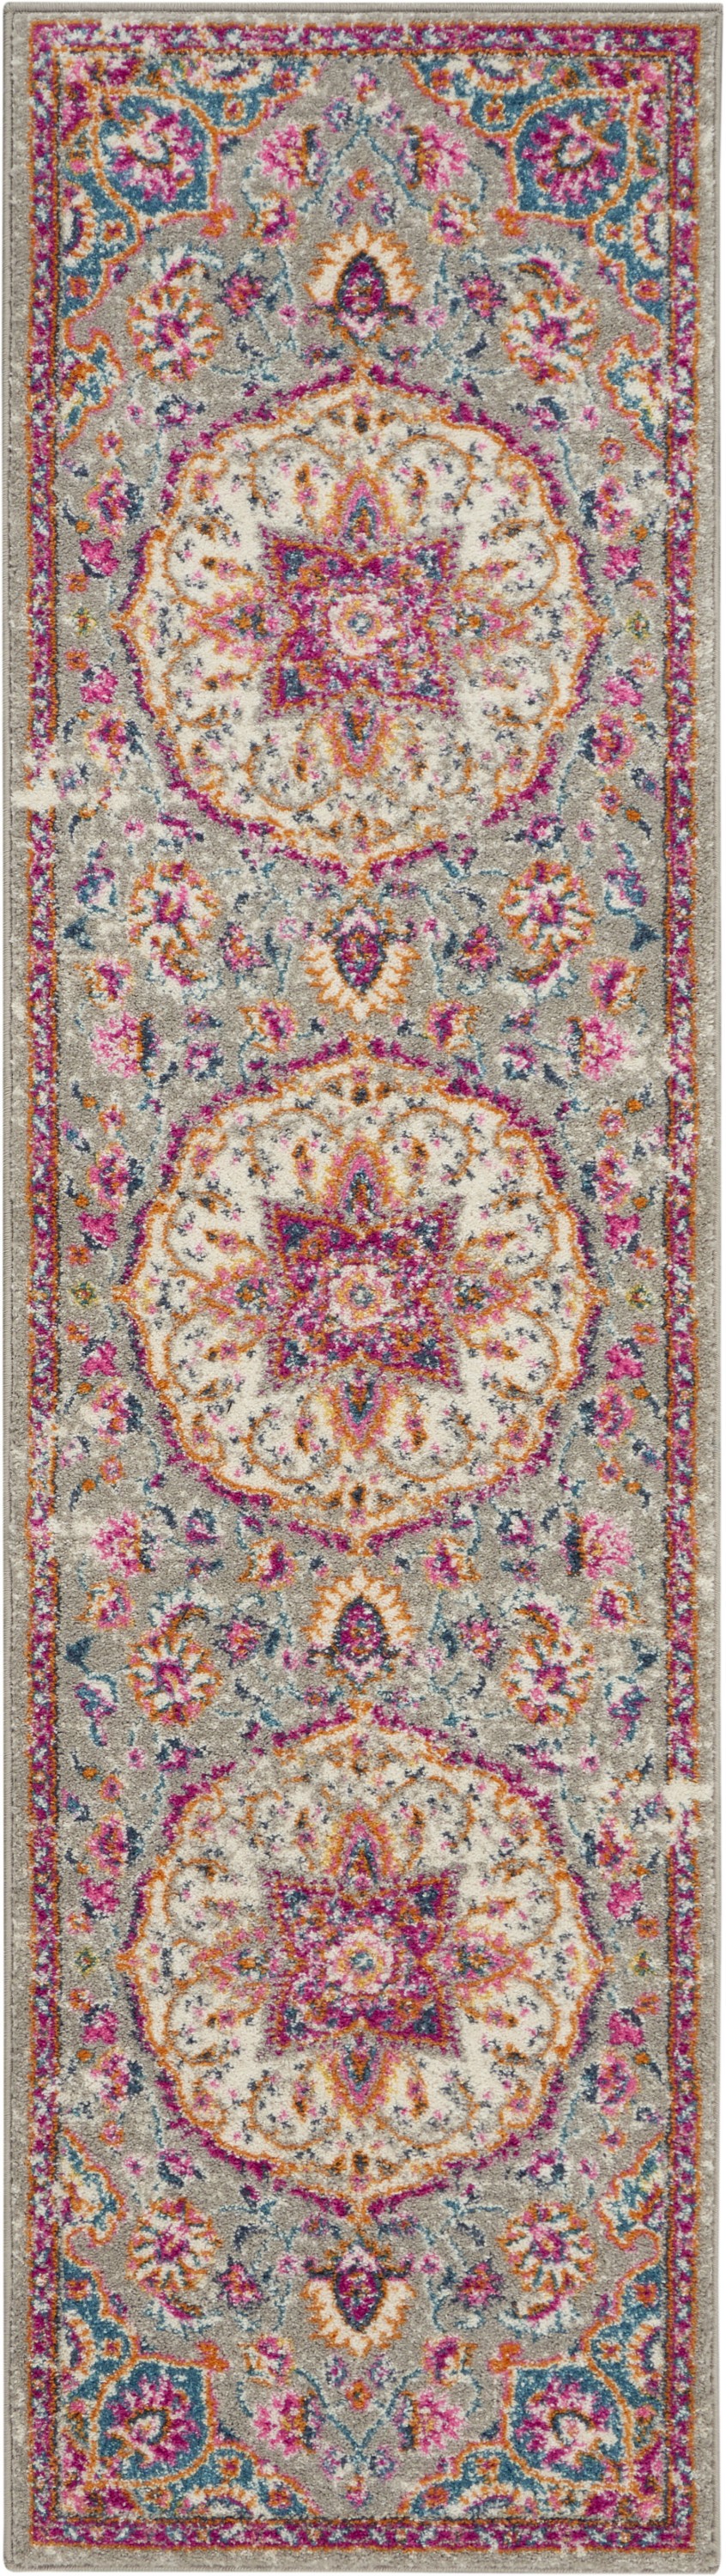 8' Pink And Gray Power Loom Runner Rug-385518-1